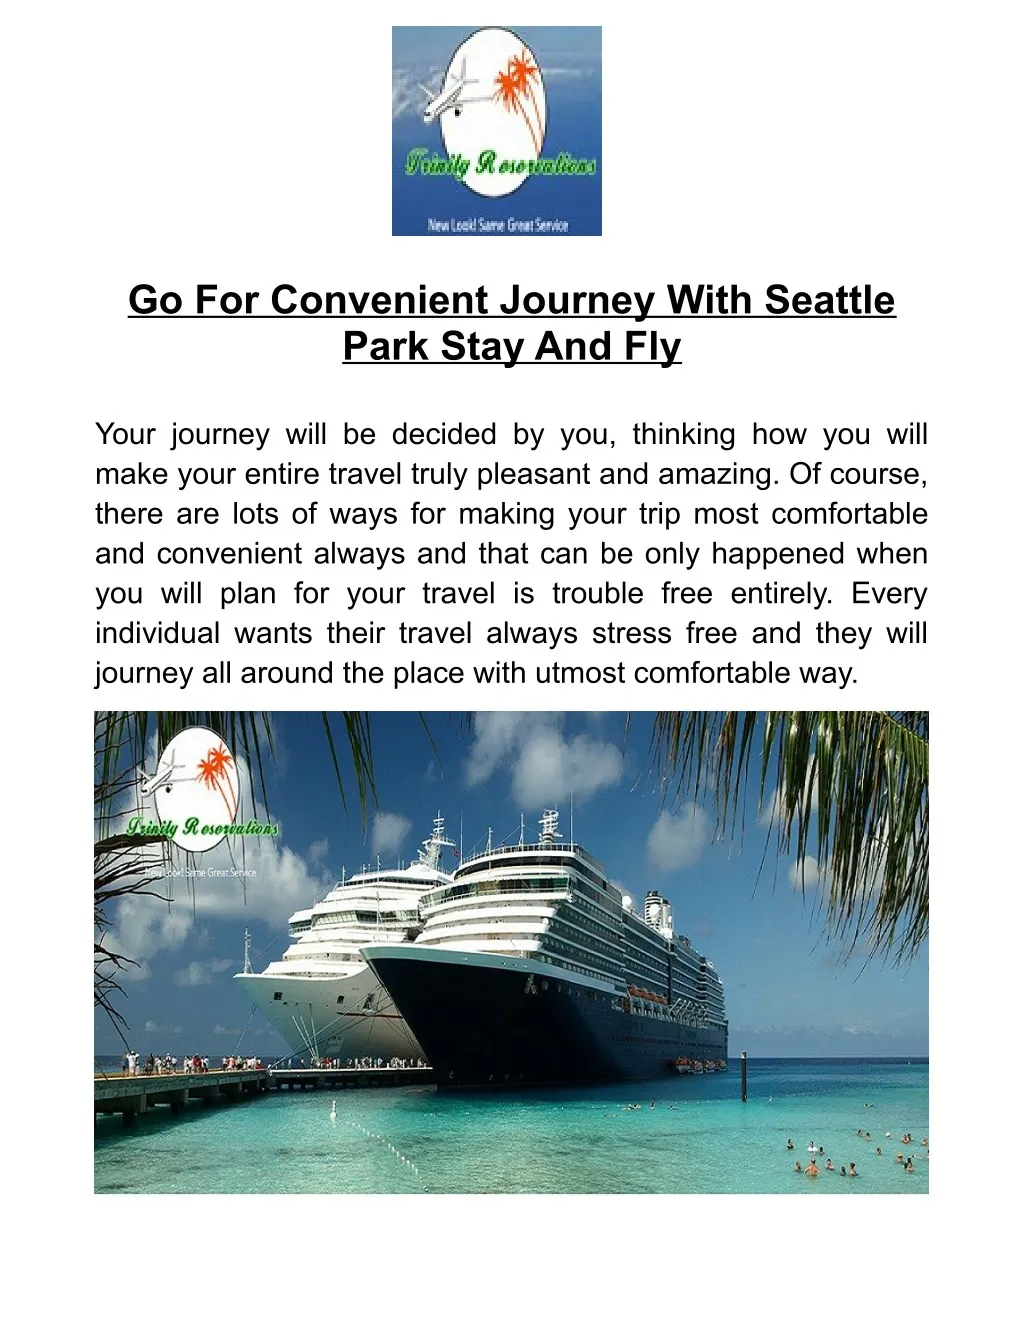 go for convenient journey with seattle park stay